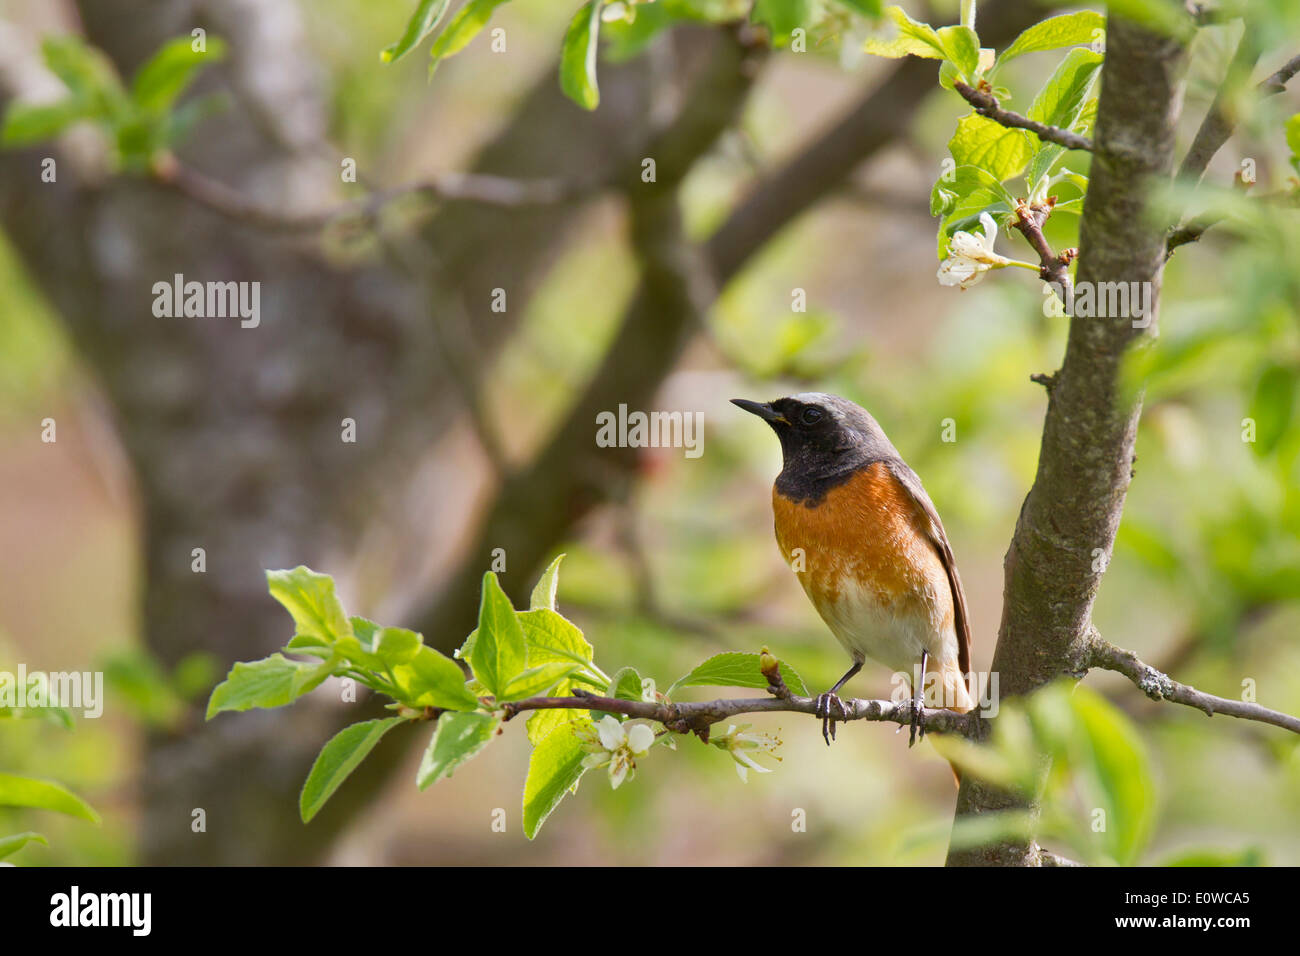 Common Redstart (Phoenicurus phoenicurus), male perched on a twig. Germany Stock Photo